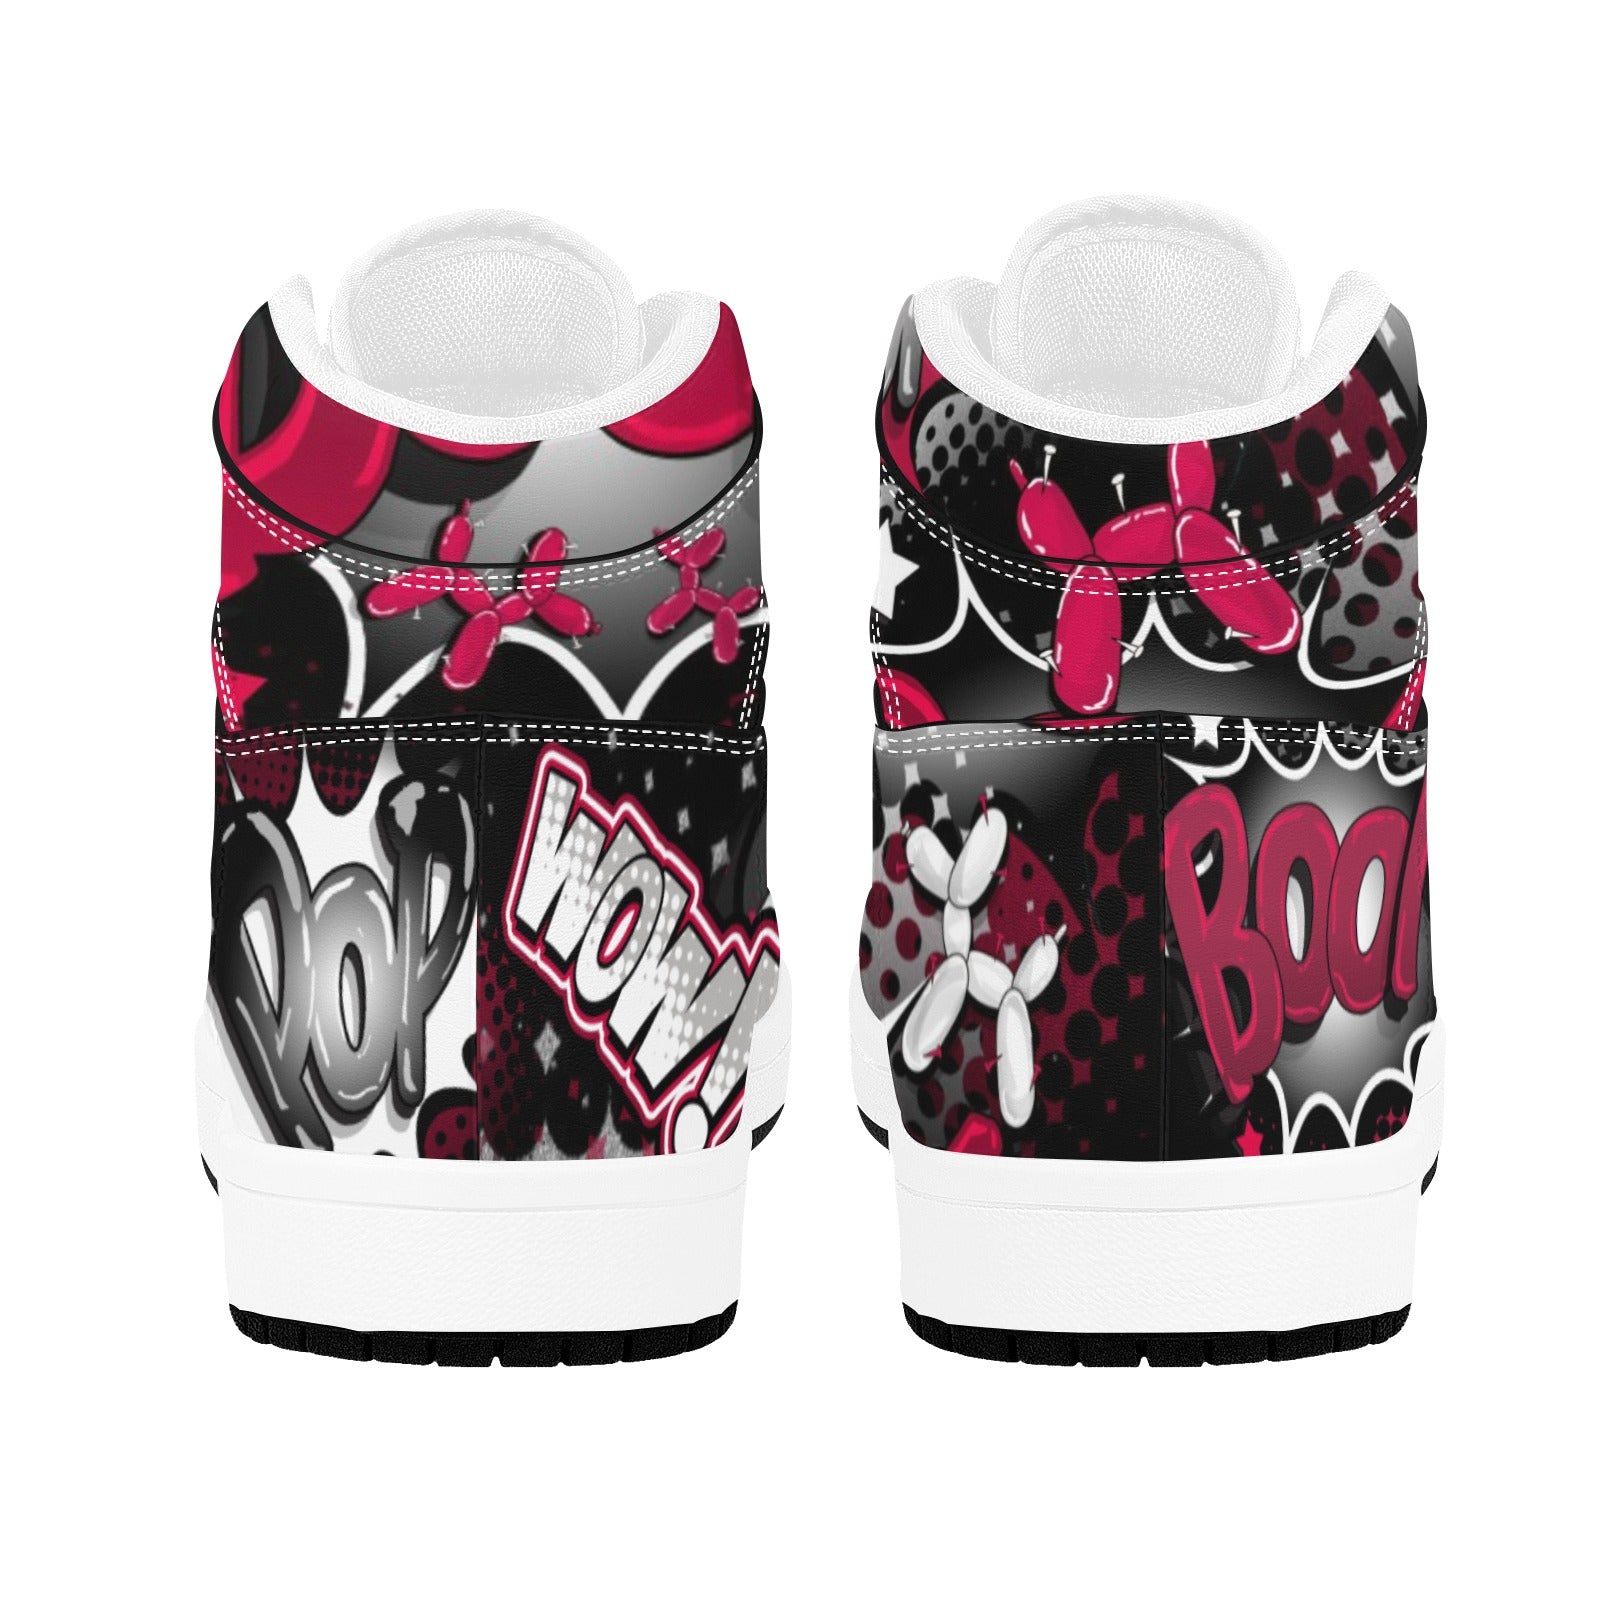 Pop art High Top shoes for artists and entertainers